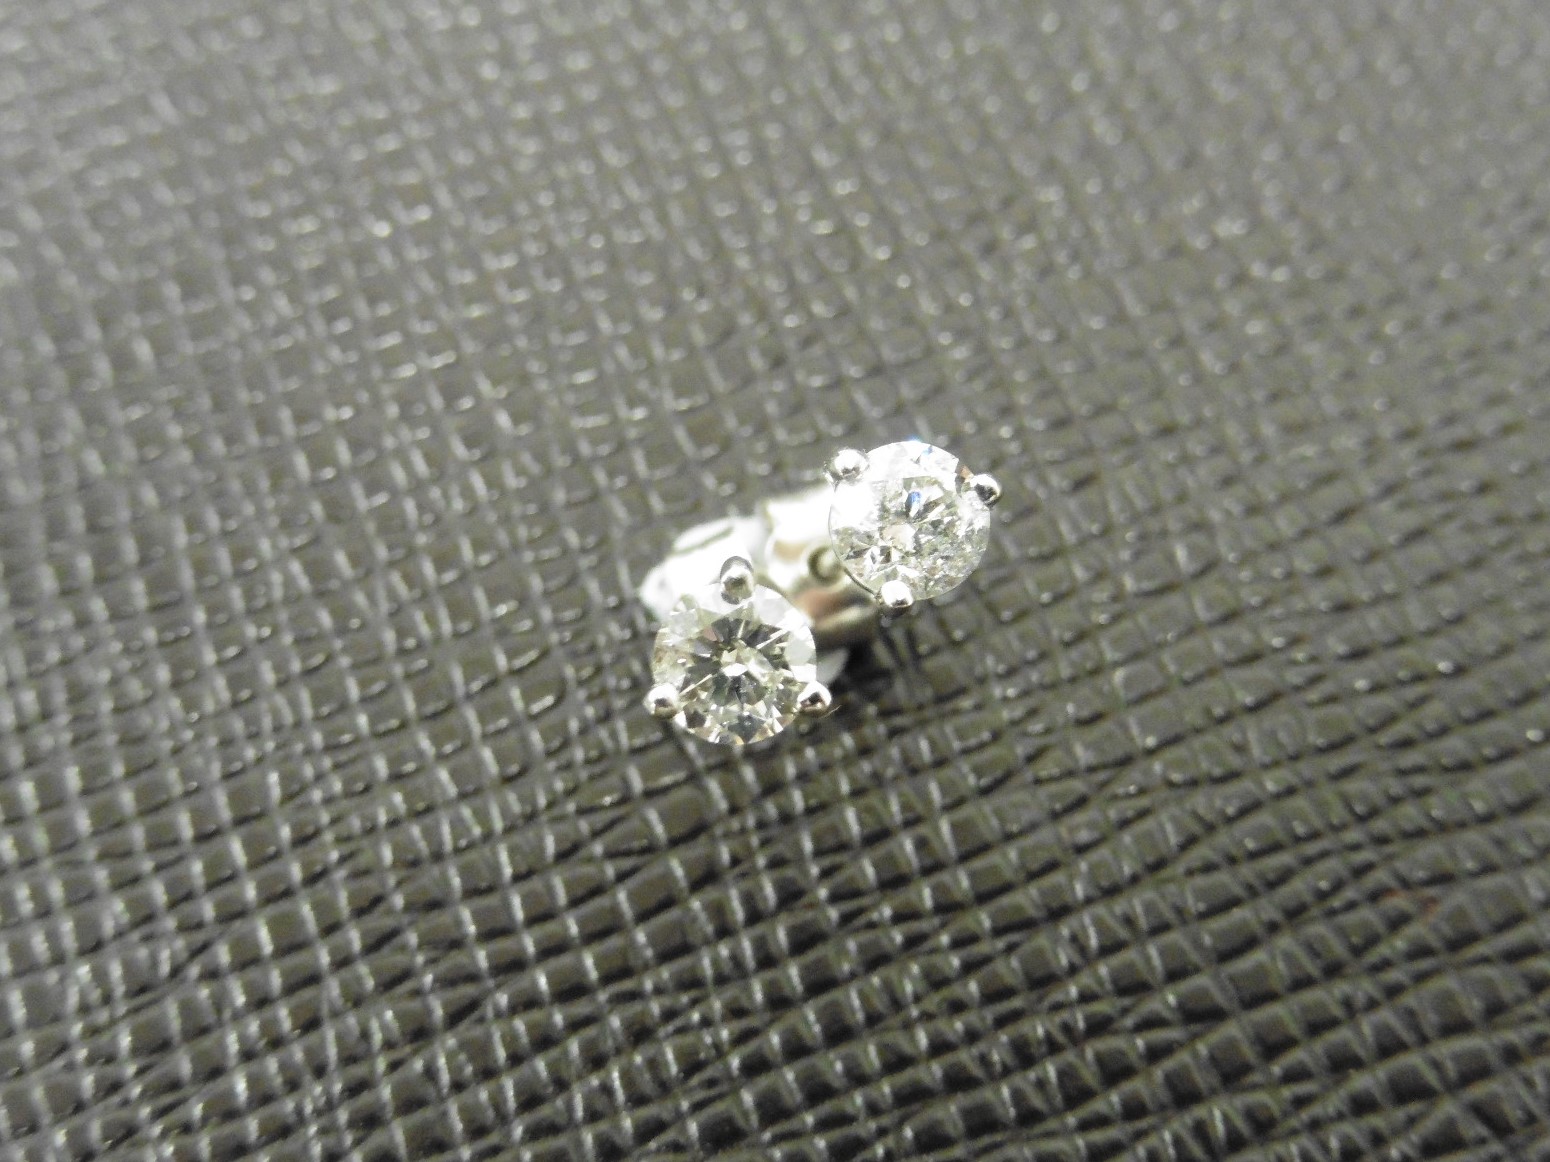 0.33ct diamond solitaire stud earrings set in platinum. I colour, si3 clarity. 3 claw setting with